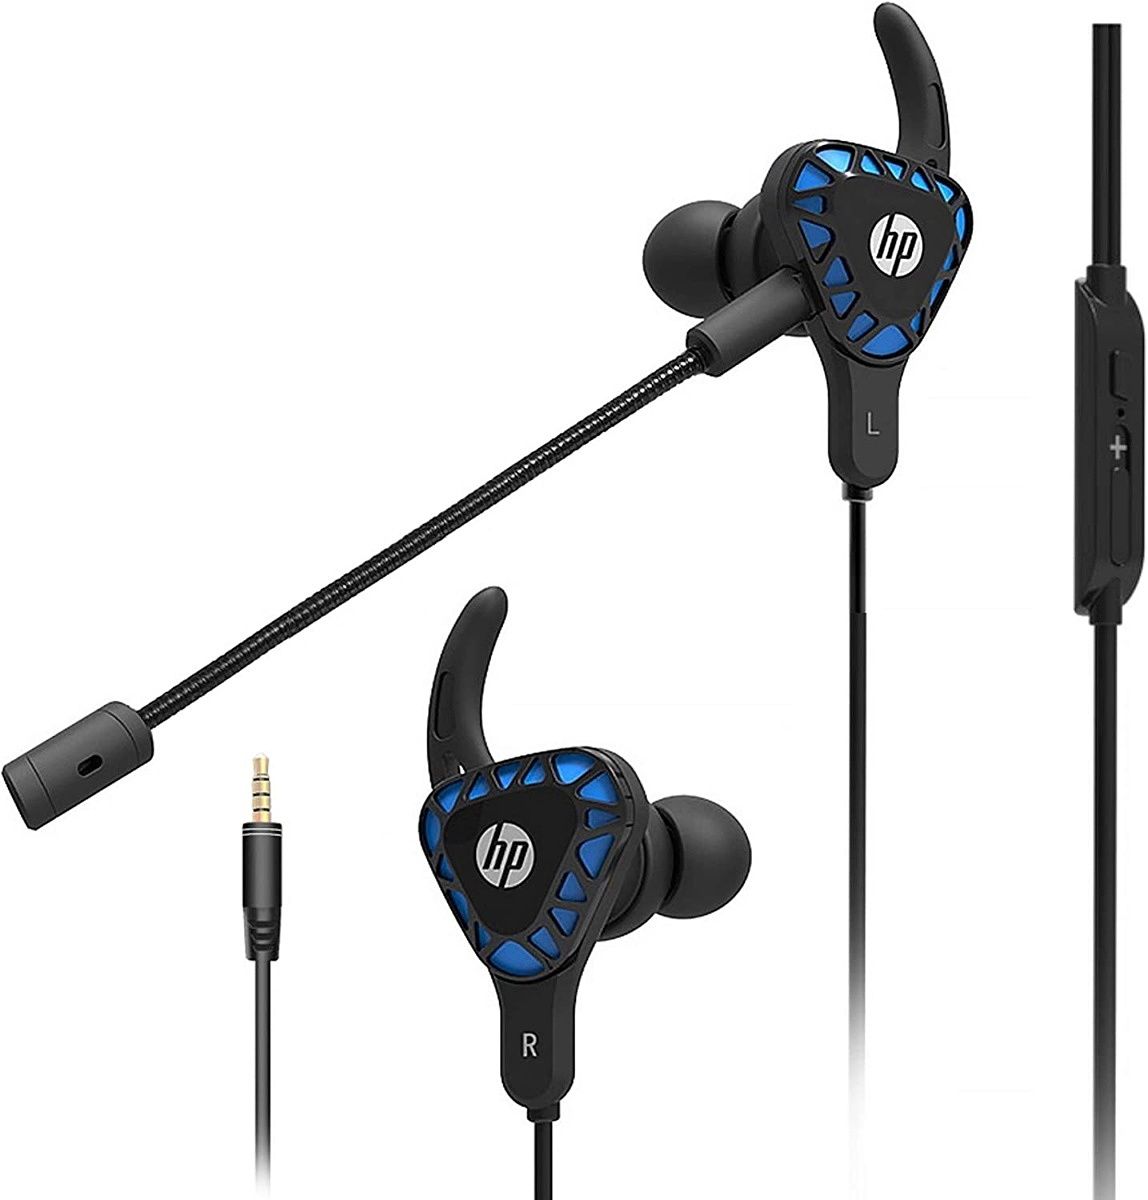 These HP earbuds feature deep bass and a built-in headset. You'll be able to feel immersed in your music.